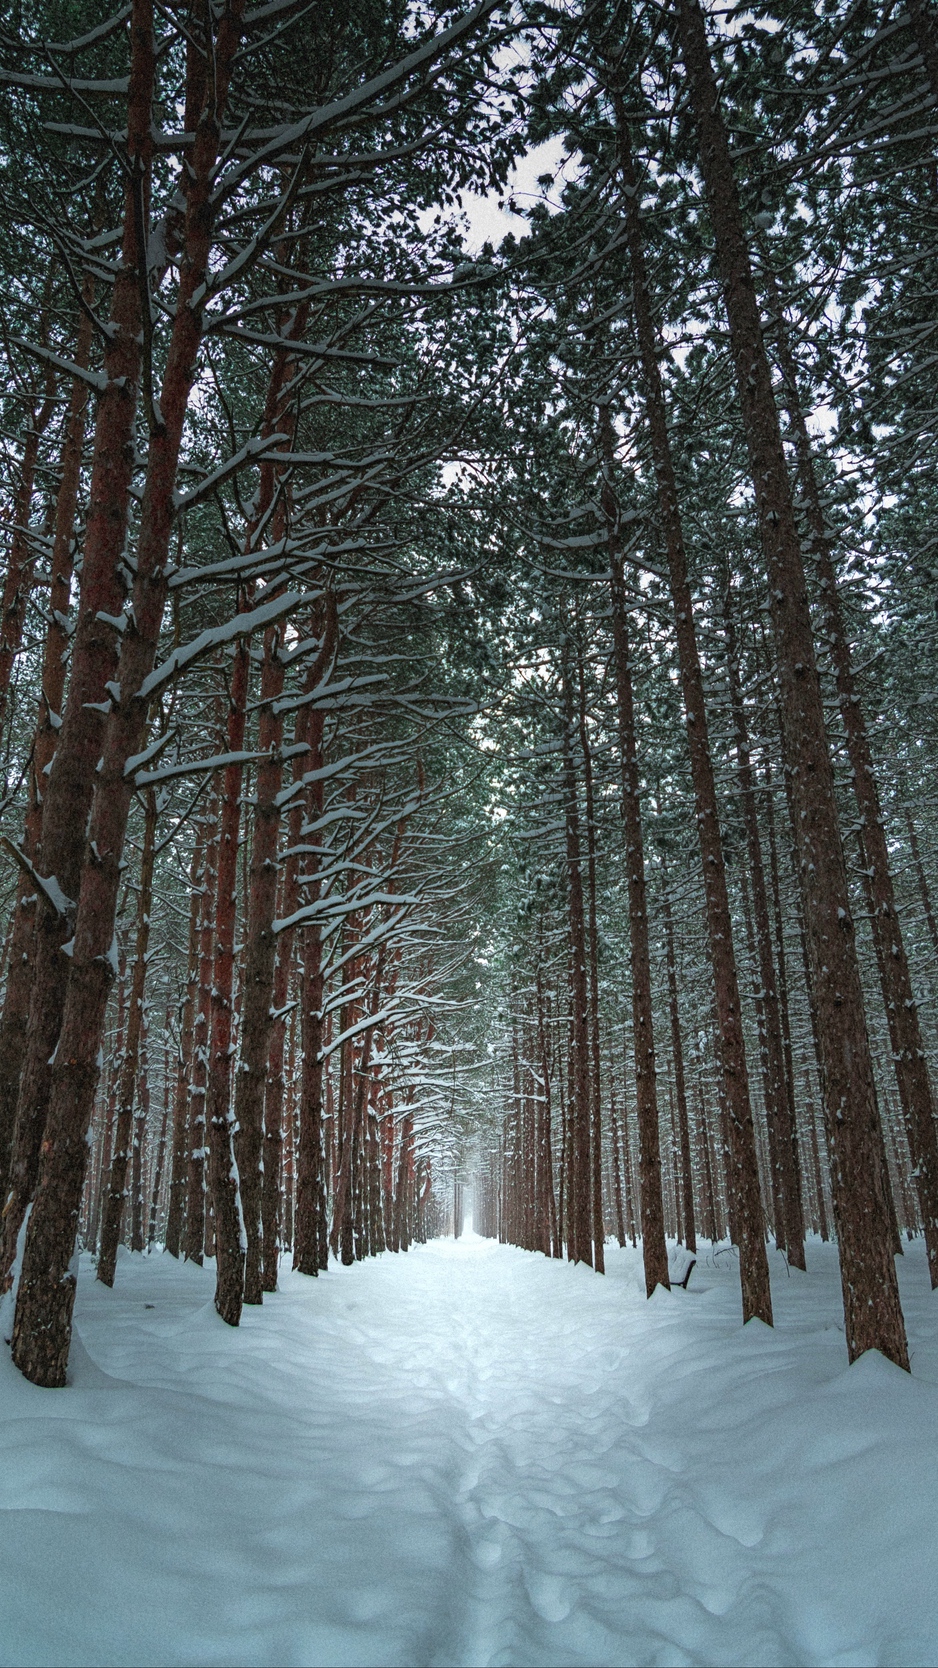 Download wallpaper 938x1668 winter, forest, trail, snow, trees